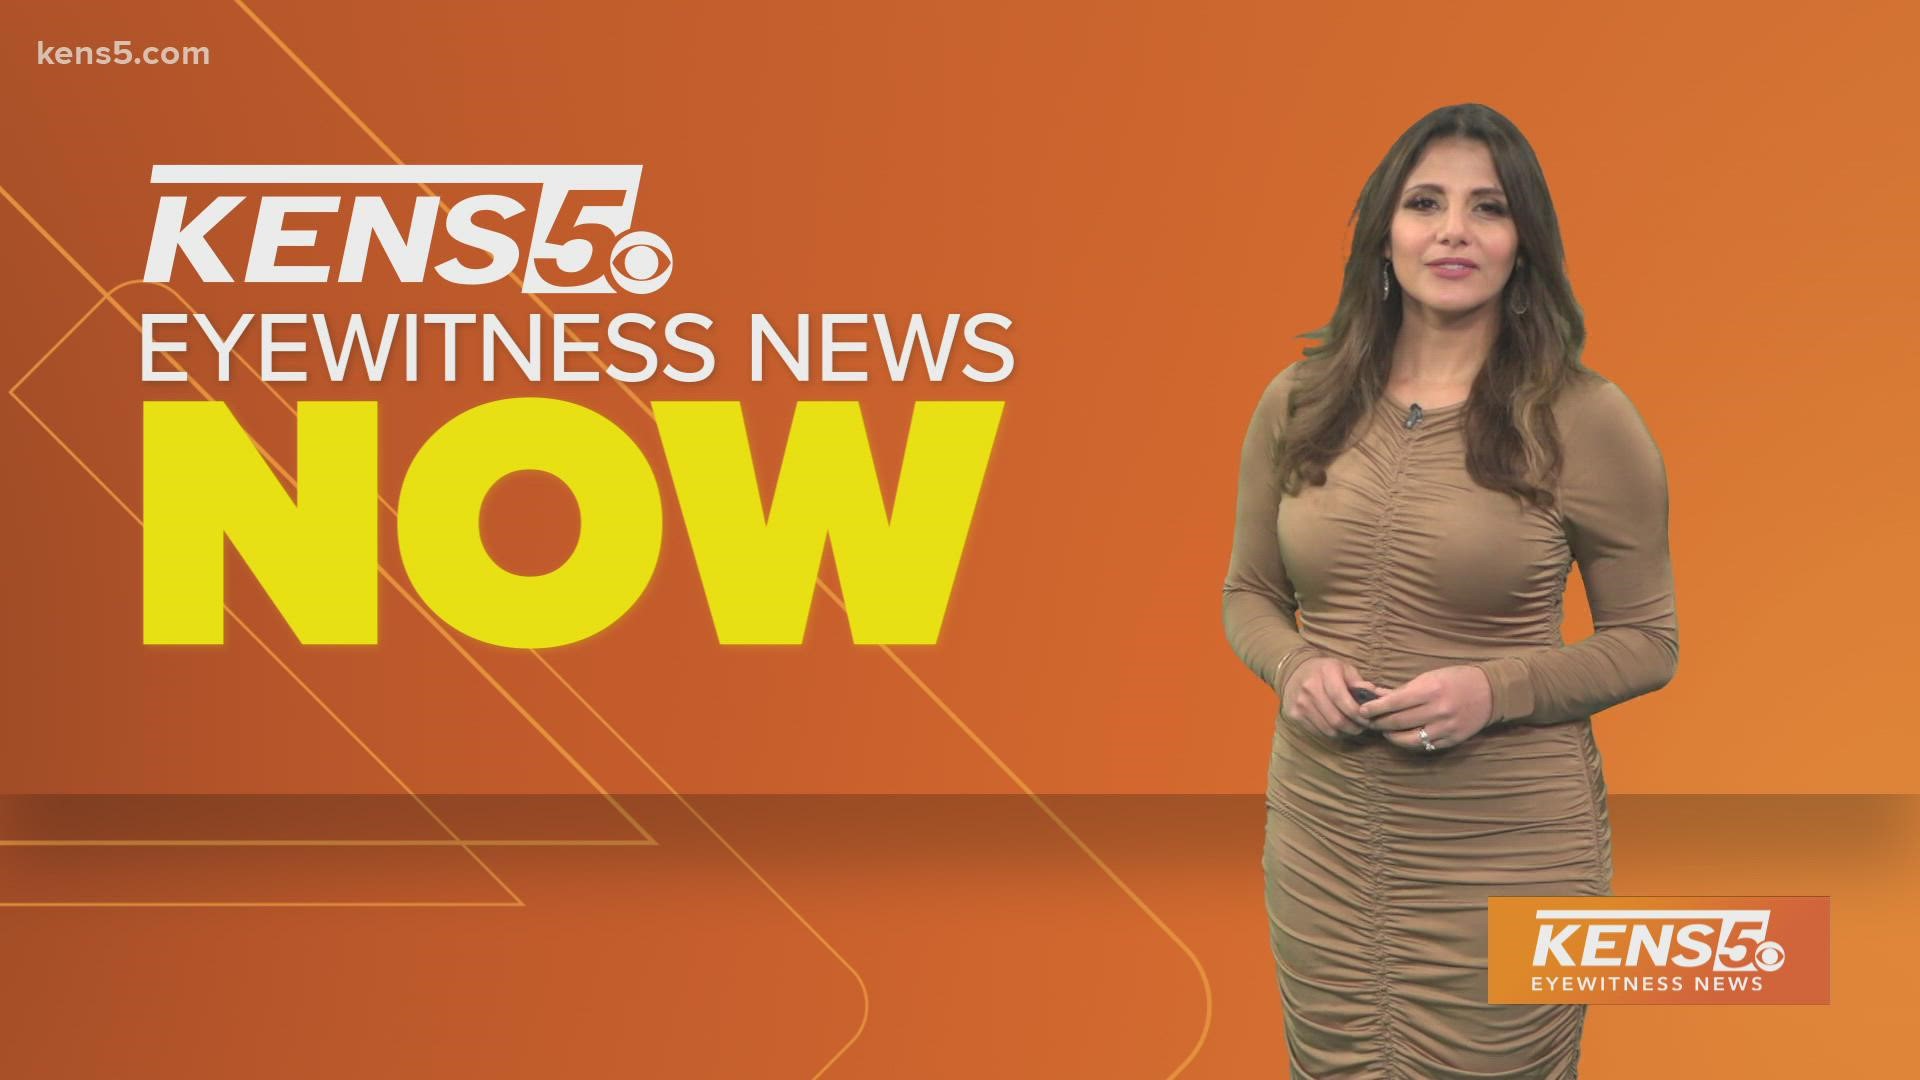 Keep up to date on your daily headlines every weekday on KENS 5 News Now with Sarah Forgany.